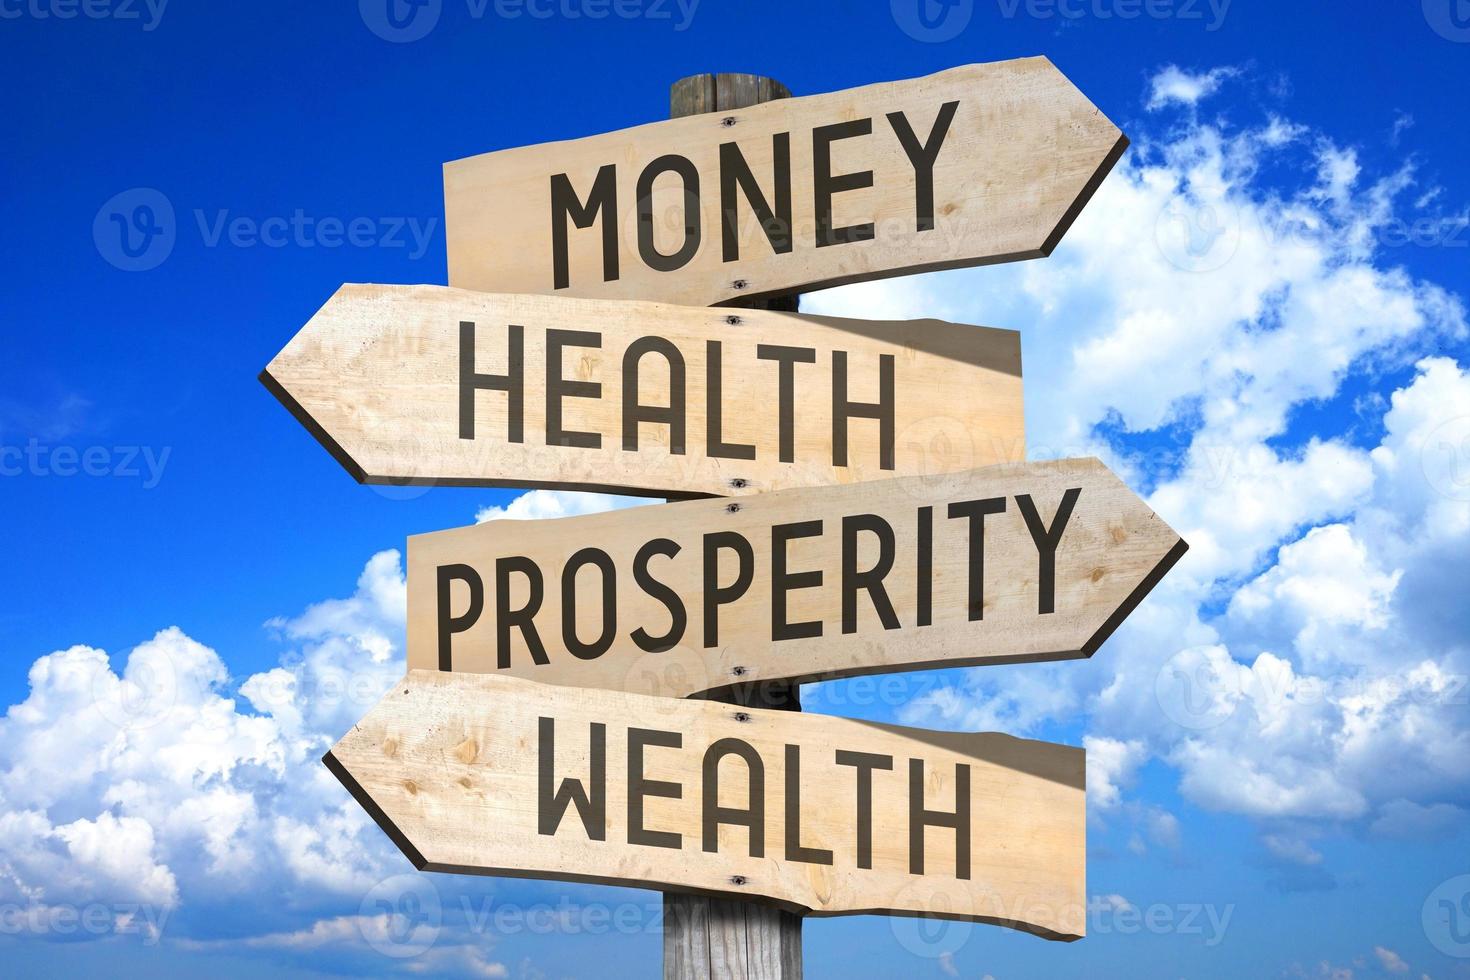 Money, Health, Prosperity, Wealth - Wooden Signpost with Four Arrows, Sky with Clouds in Background photo